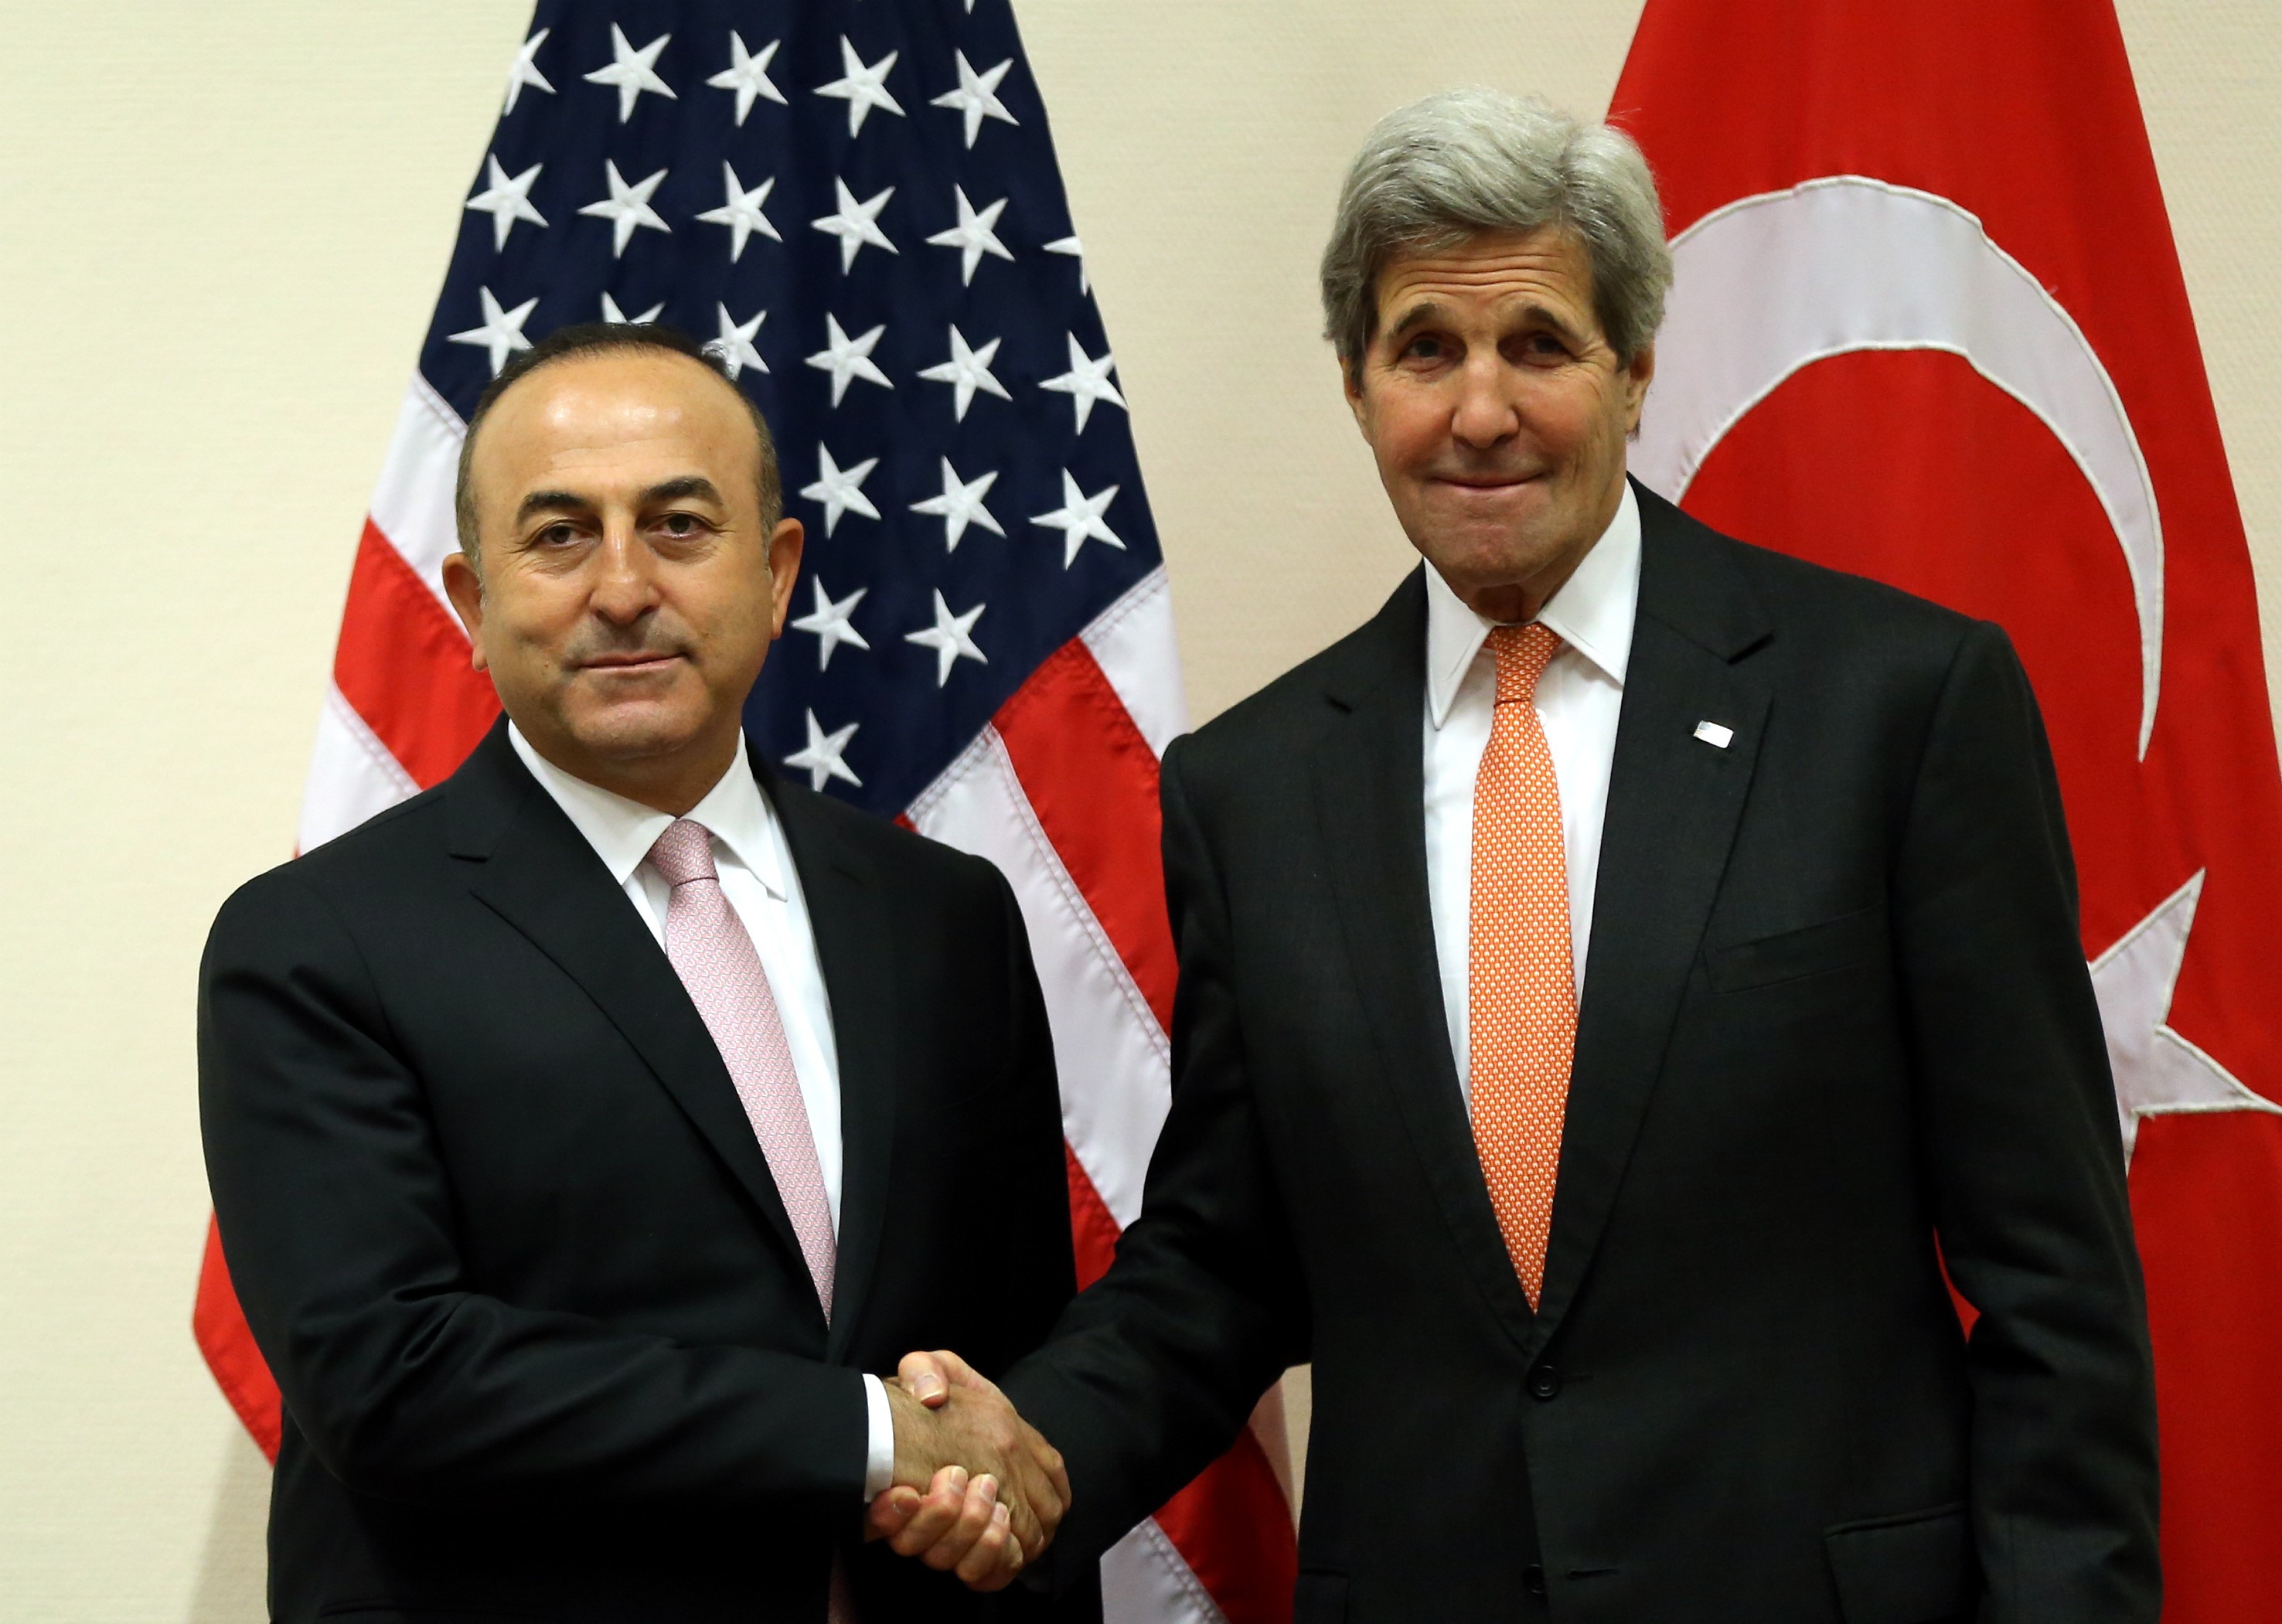 Turkish Foreign Affairs Minister Mevlut Cavusoglu (left) and US Secretary of State John Kerry (right) shake hands during the NATO Foreign ministers meeting at the NATO headquarters in Brussels, Belgium on May 20, 2016. (Anadolu Agency—Getty Images)